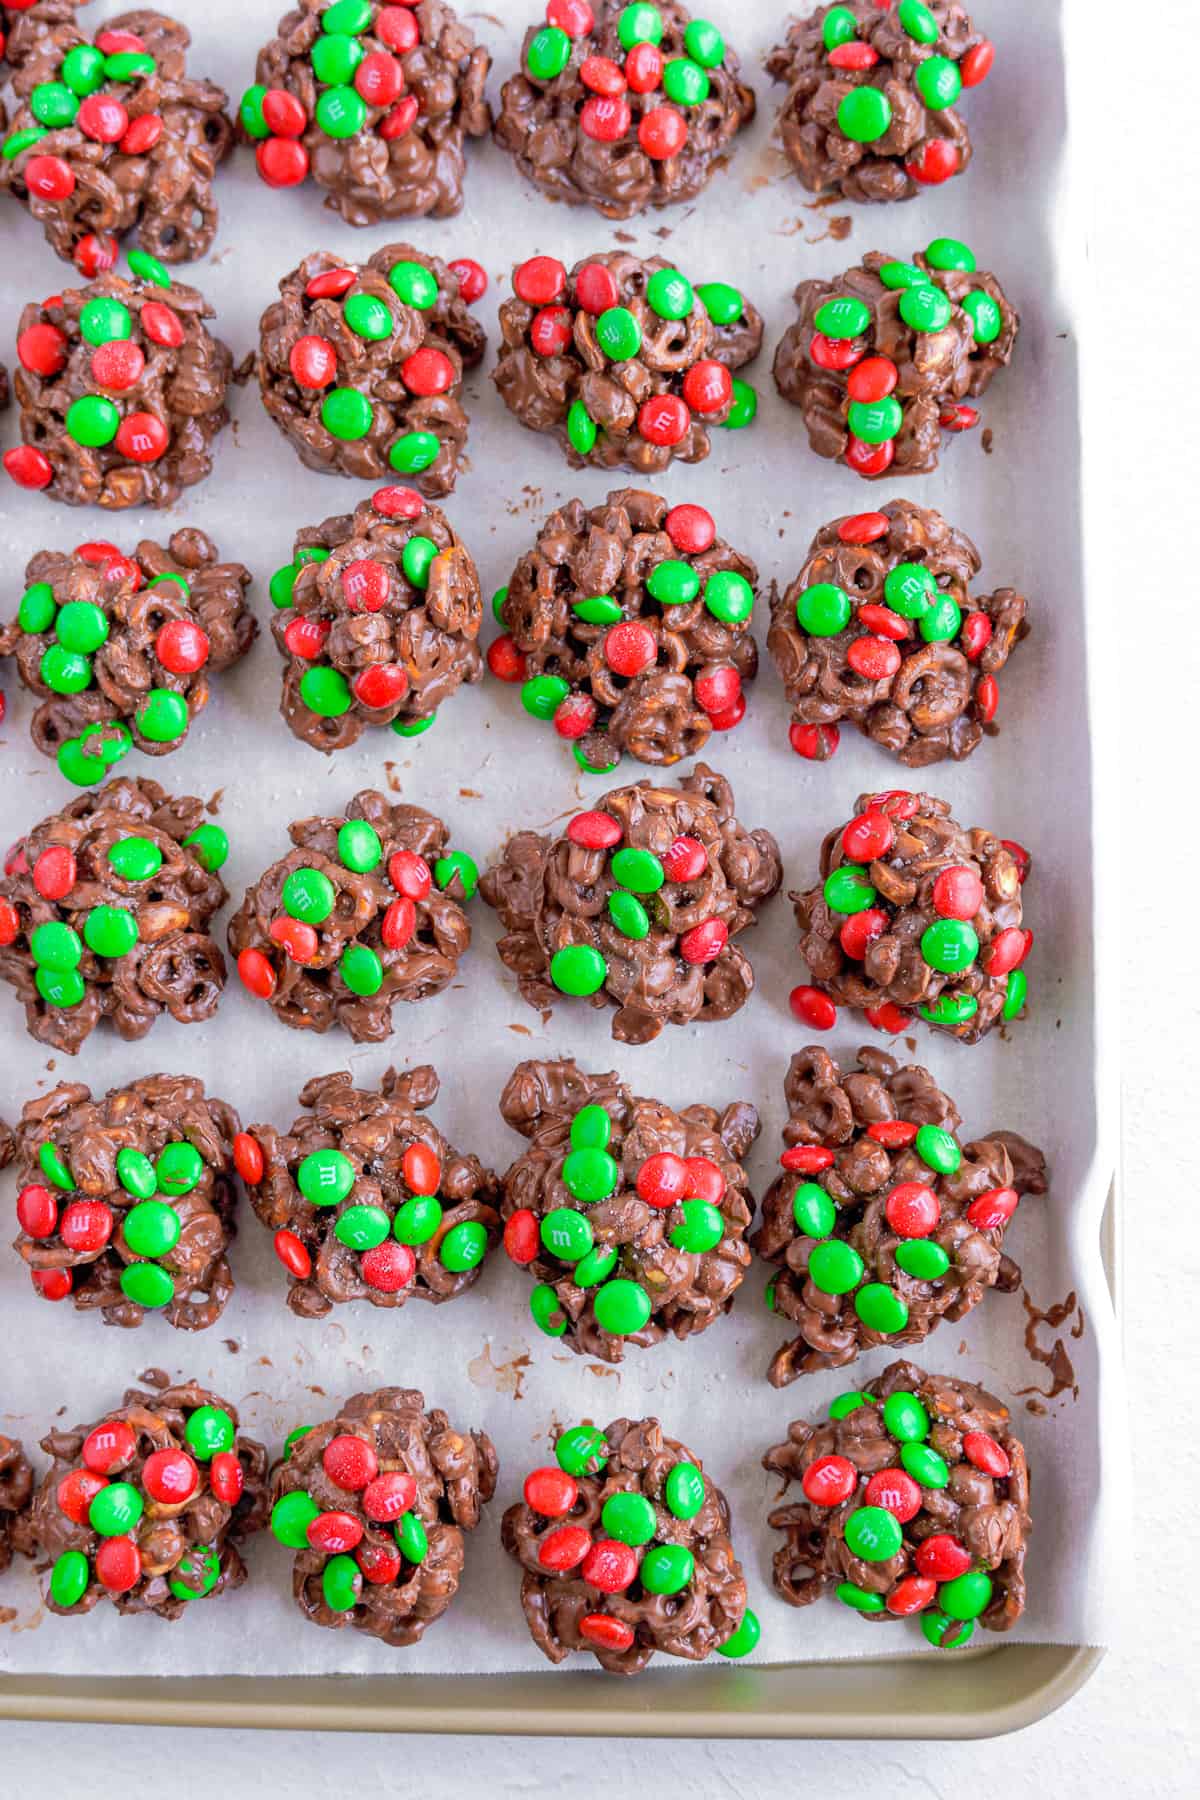 Chocolate crockpot candy lined up in rows on a parchment paper lined pan from above.